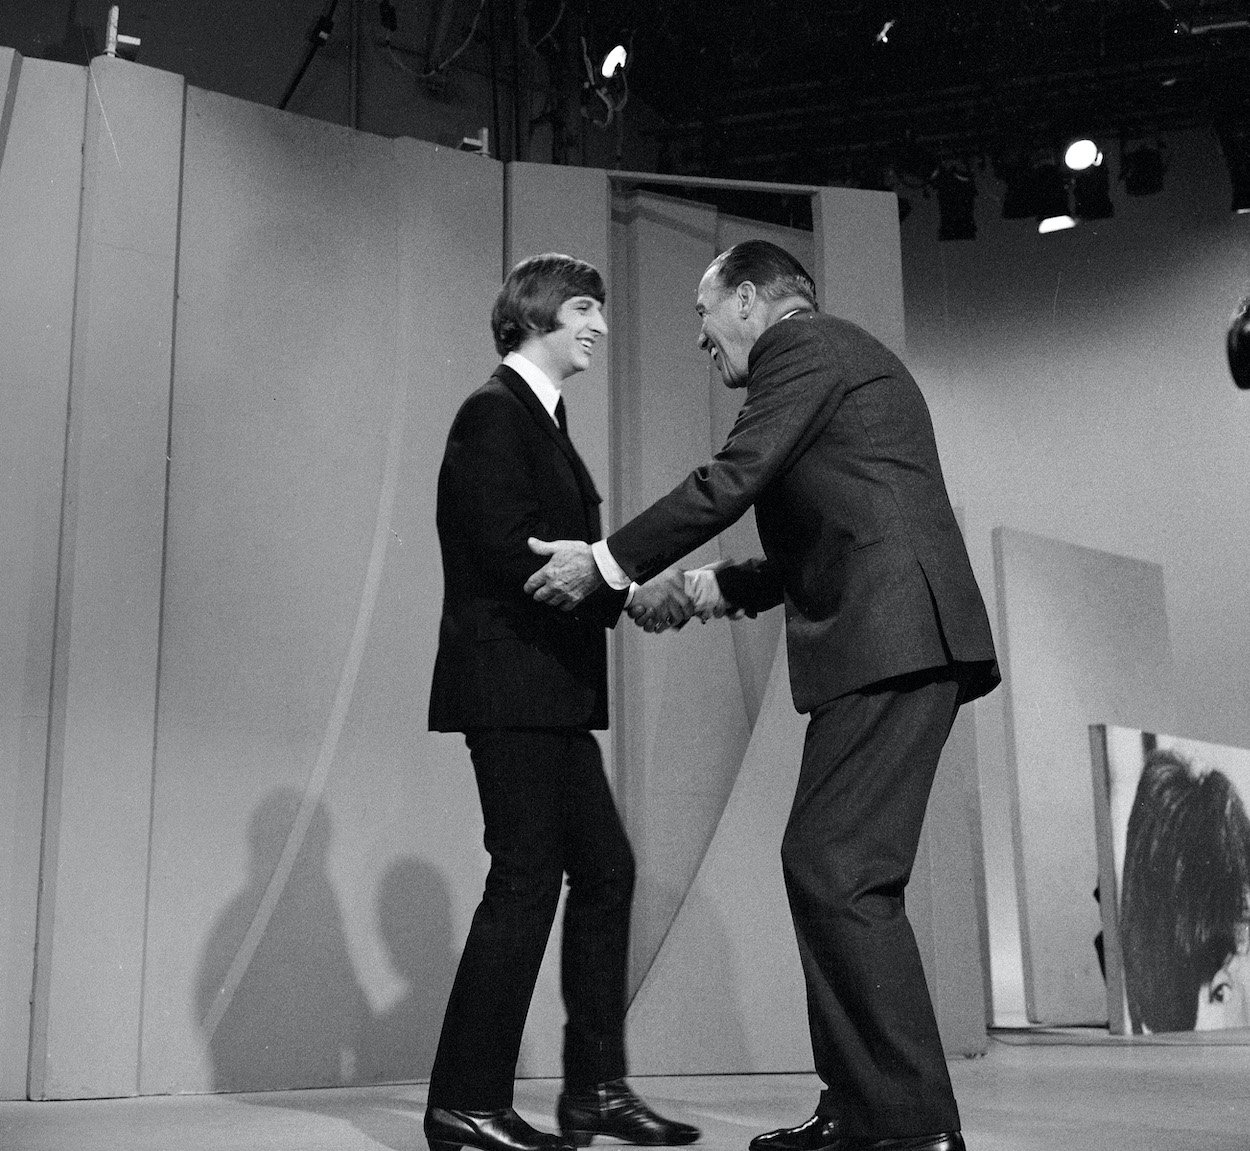 Ringo Starr (left) shakes hands with Ed Sullivan in 1965. Ringo said a chance encounter with Sullivan led to them being booked on his show, which led to international superstardom.